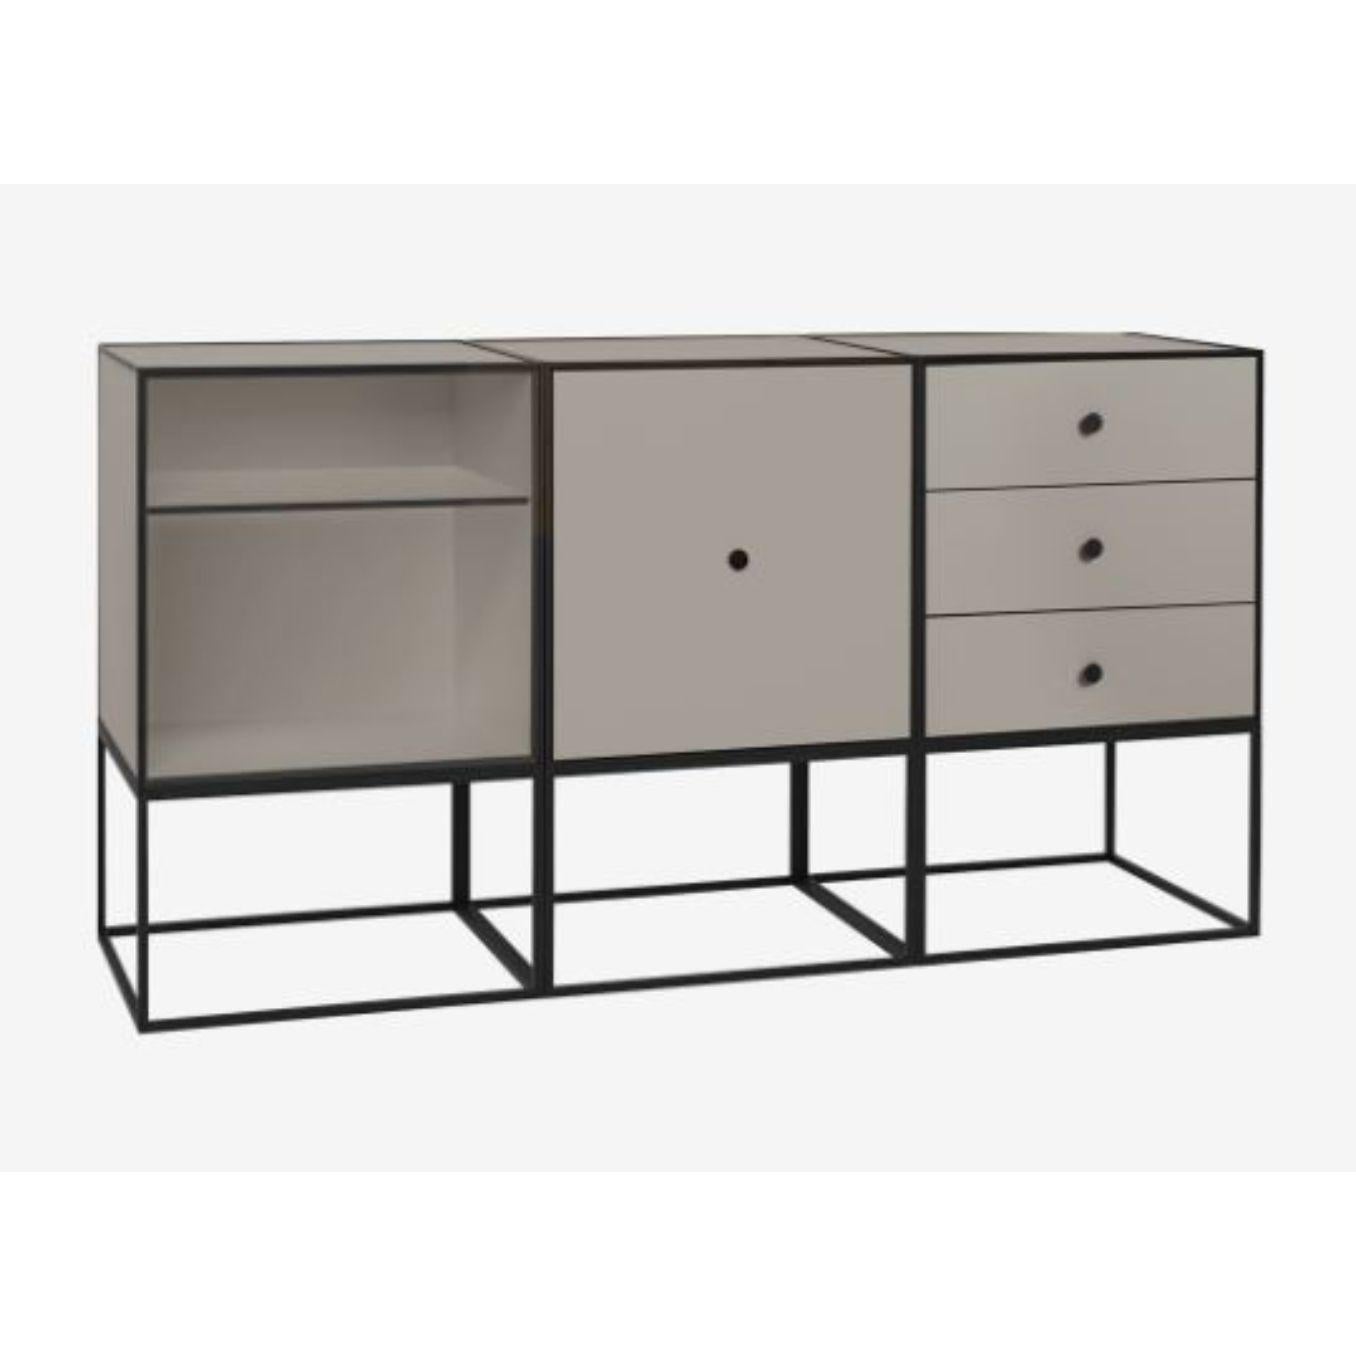 49 sand frame sideboard trio by Lassen
Dimensions: D 147 x W 42 x H 77 cm 
Materials: Finér, melamin, melamine, metal, veneer
Also available in different colours and dimensions.
Weight: 88 kg

By Lassen is a Danish design brand focused on